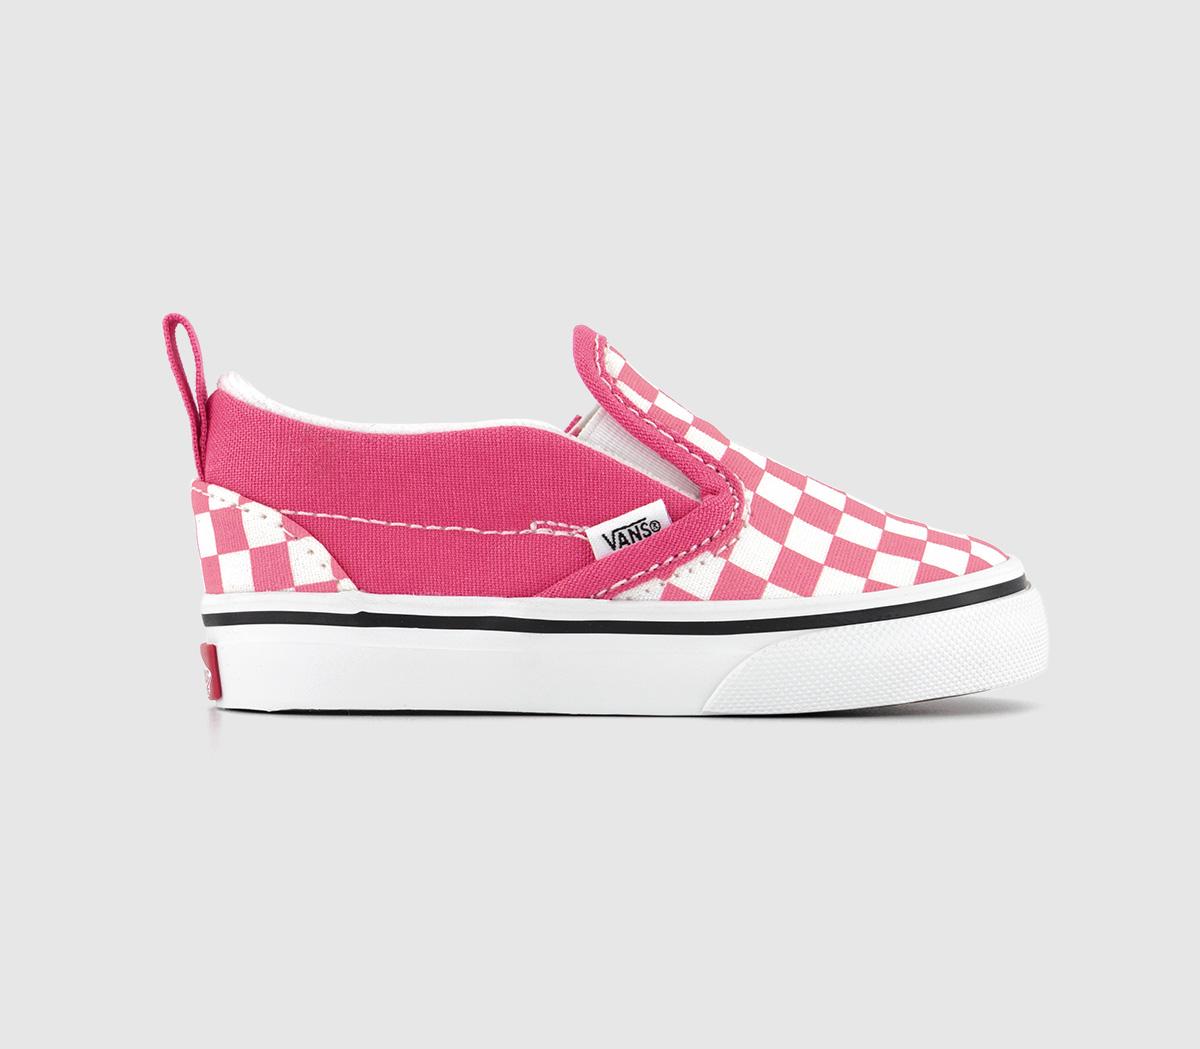 VansClassic Slip On Toddler TrainersColor Theory Checkerboard Honeysuckle